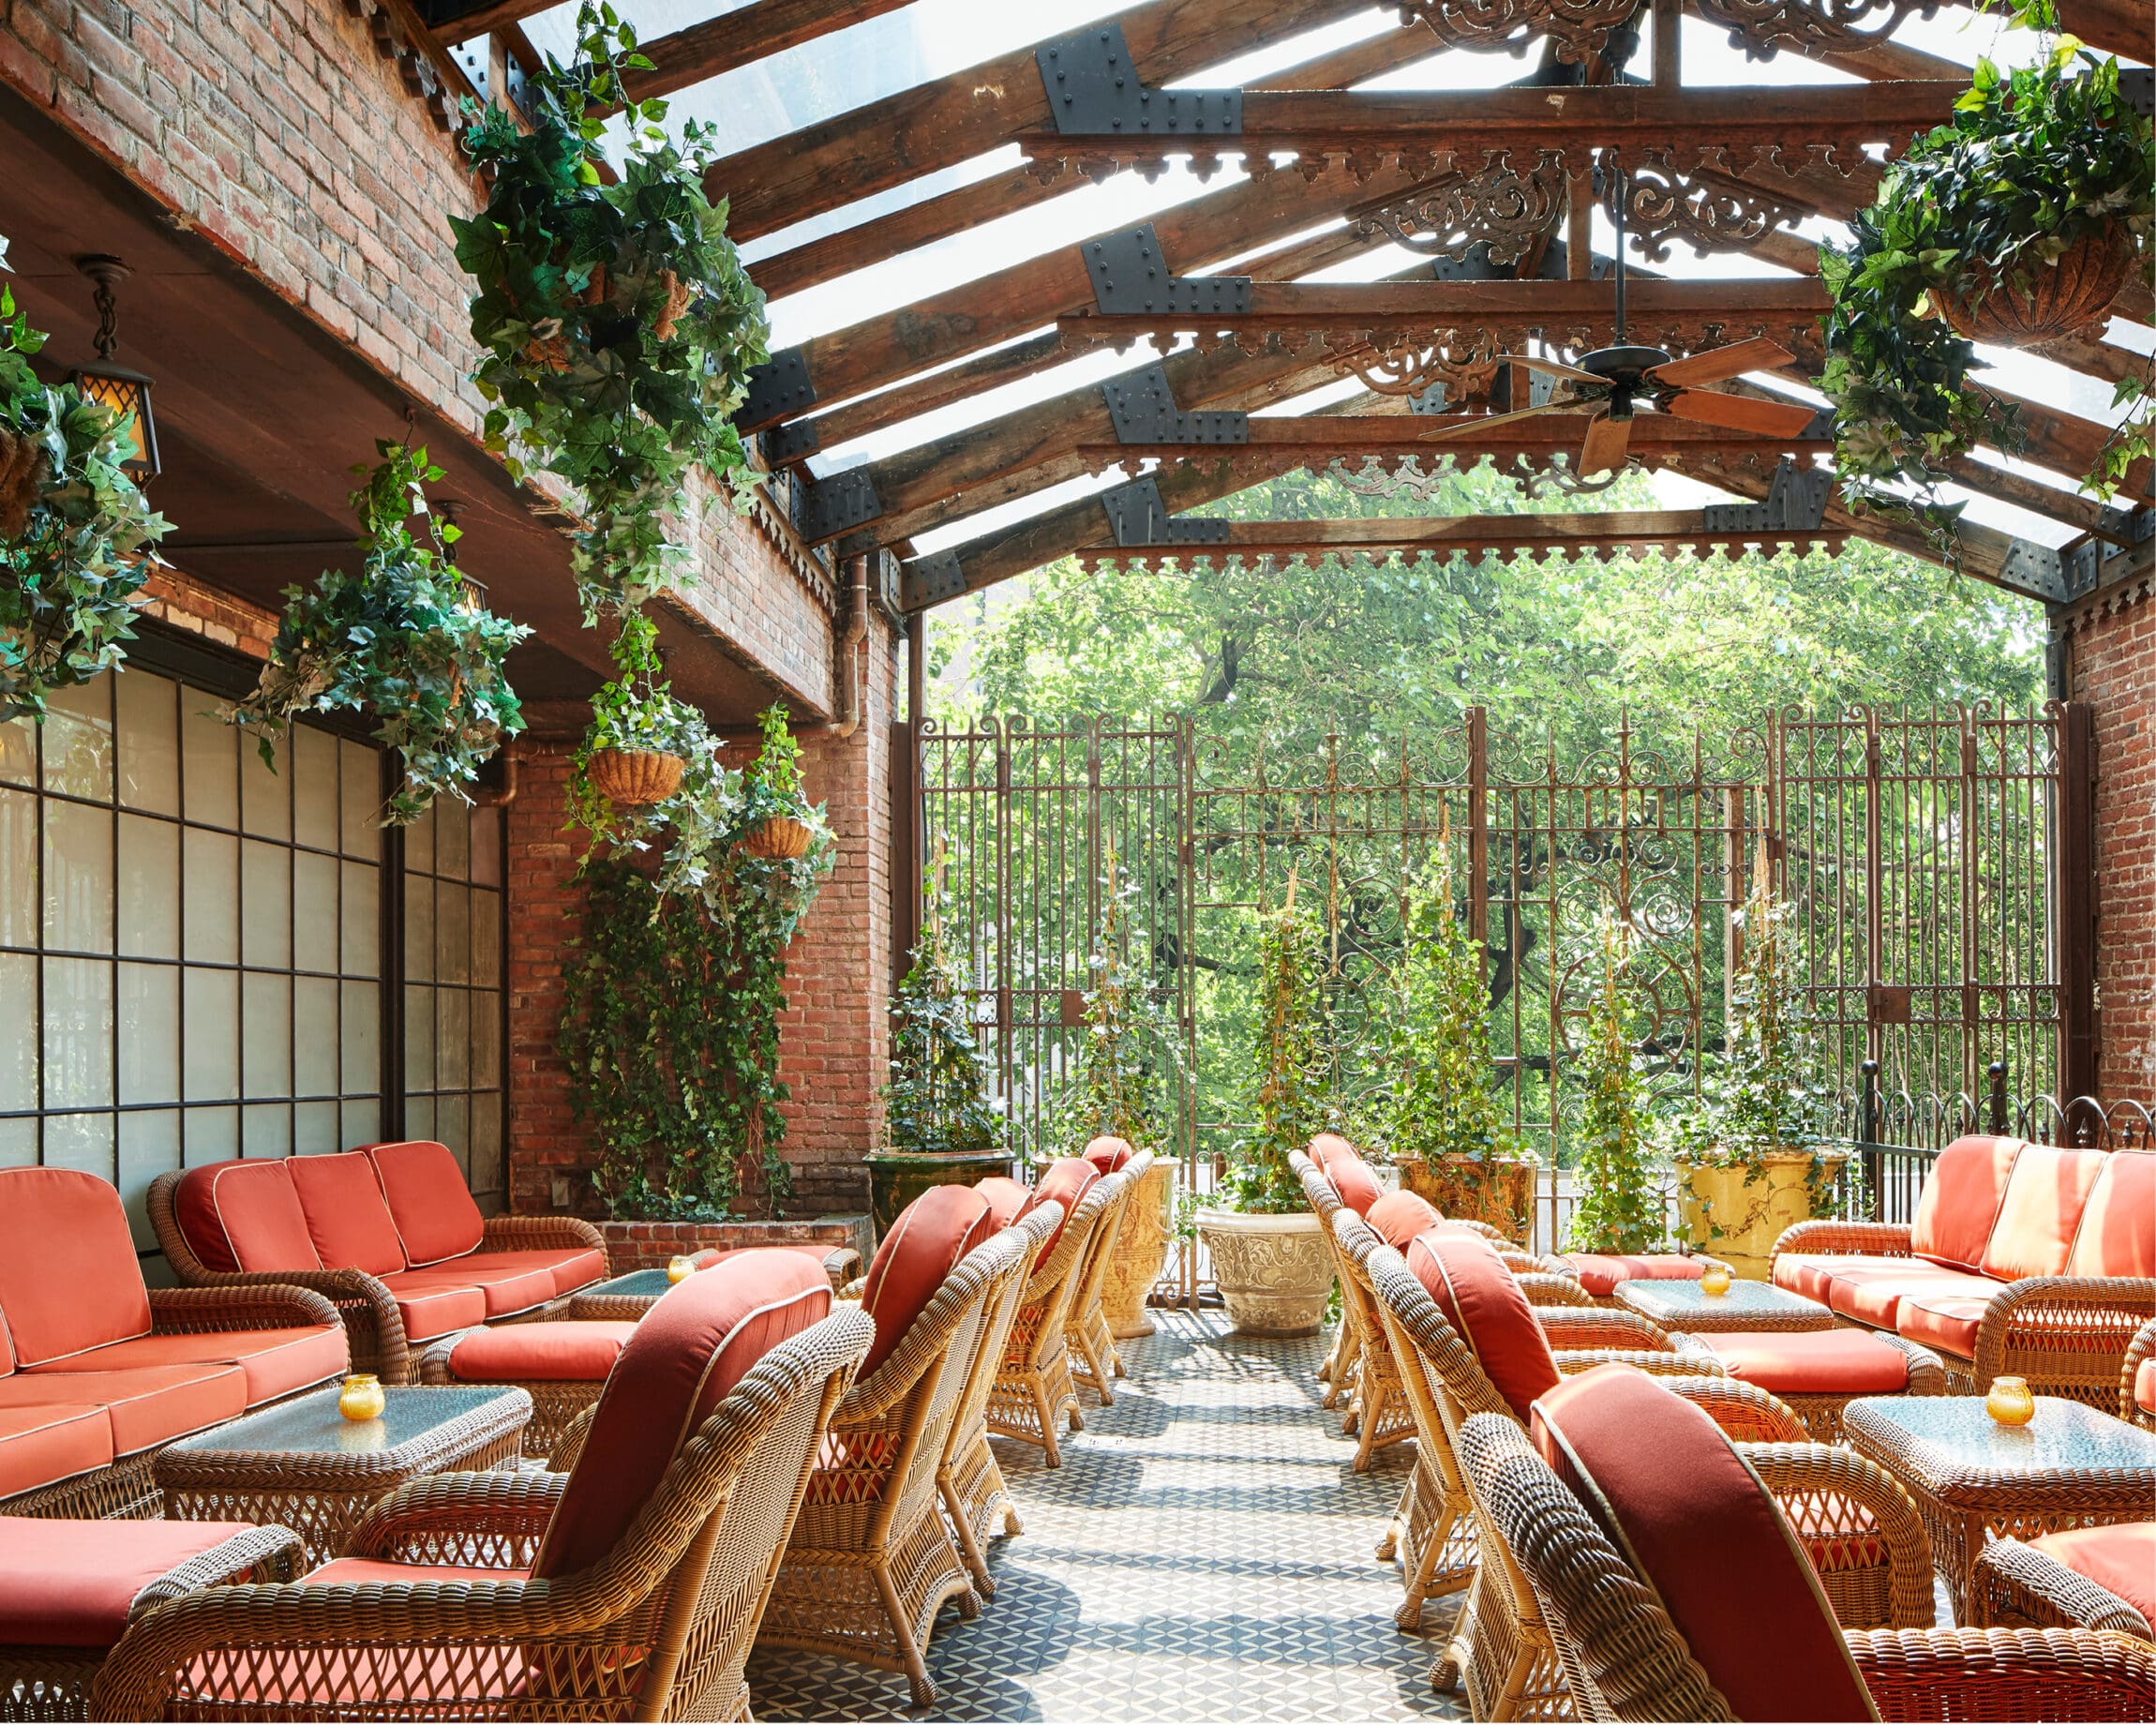 The best hotels in New York | The Bowery patio with orange cushioned seats and greenery hanging.